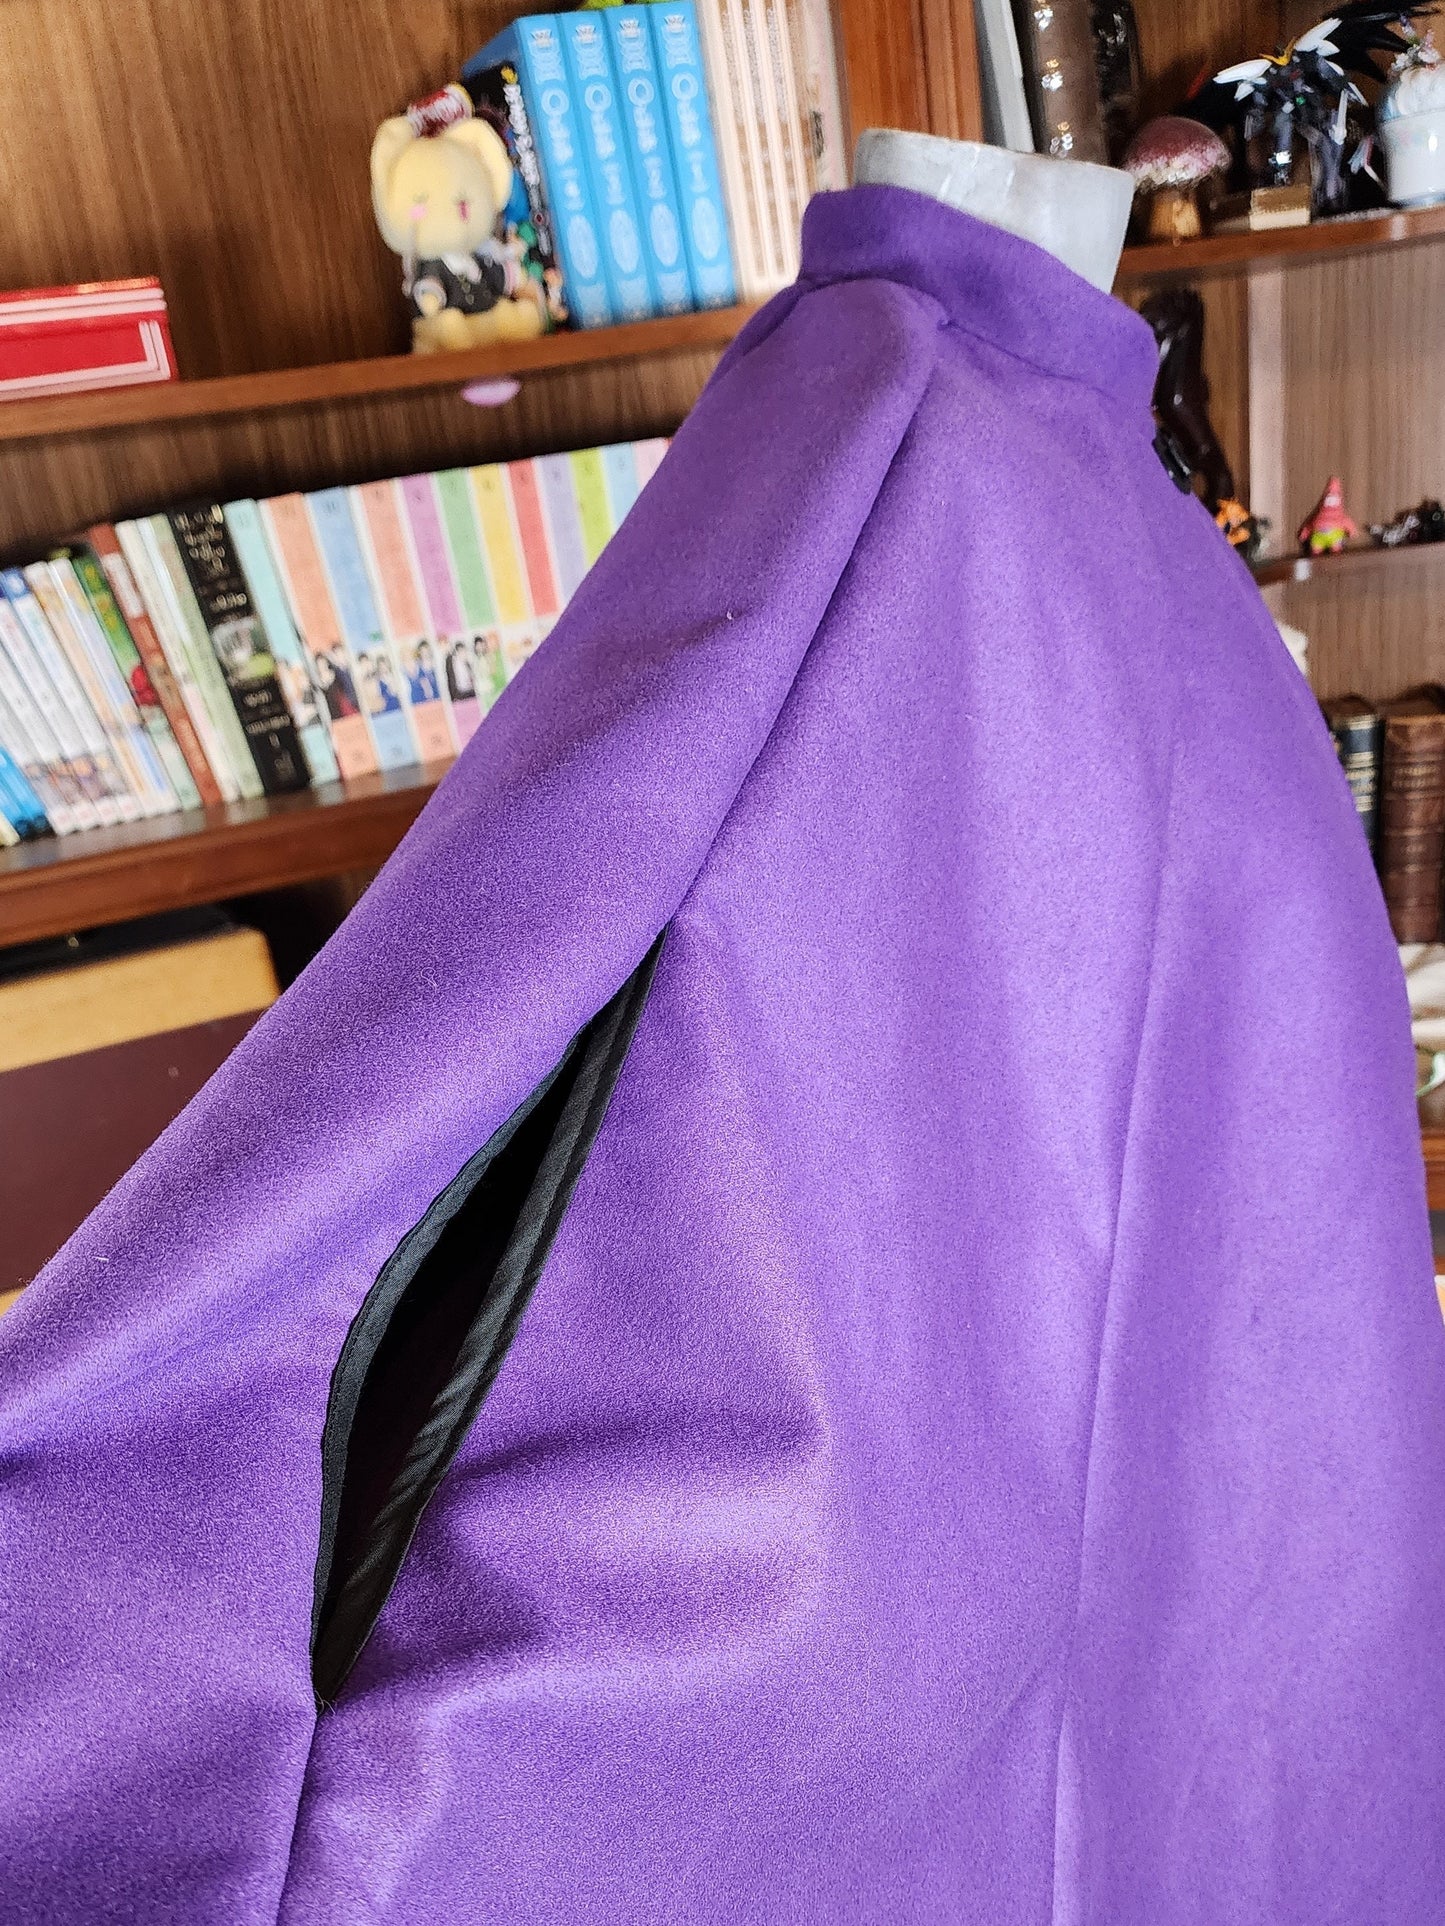 Market Day Cape- Royal Purple Mid-Length Cape with Collar and Arm Slits